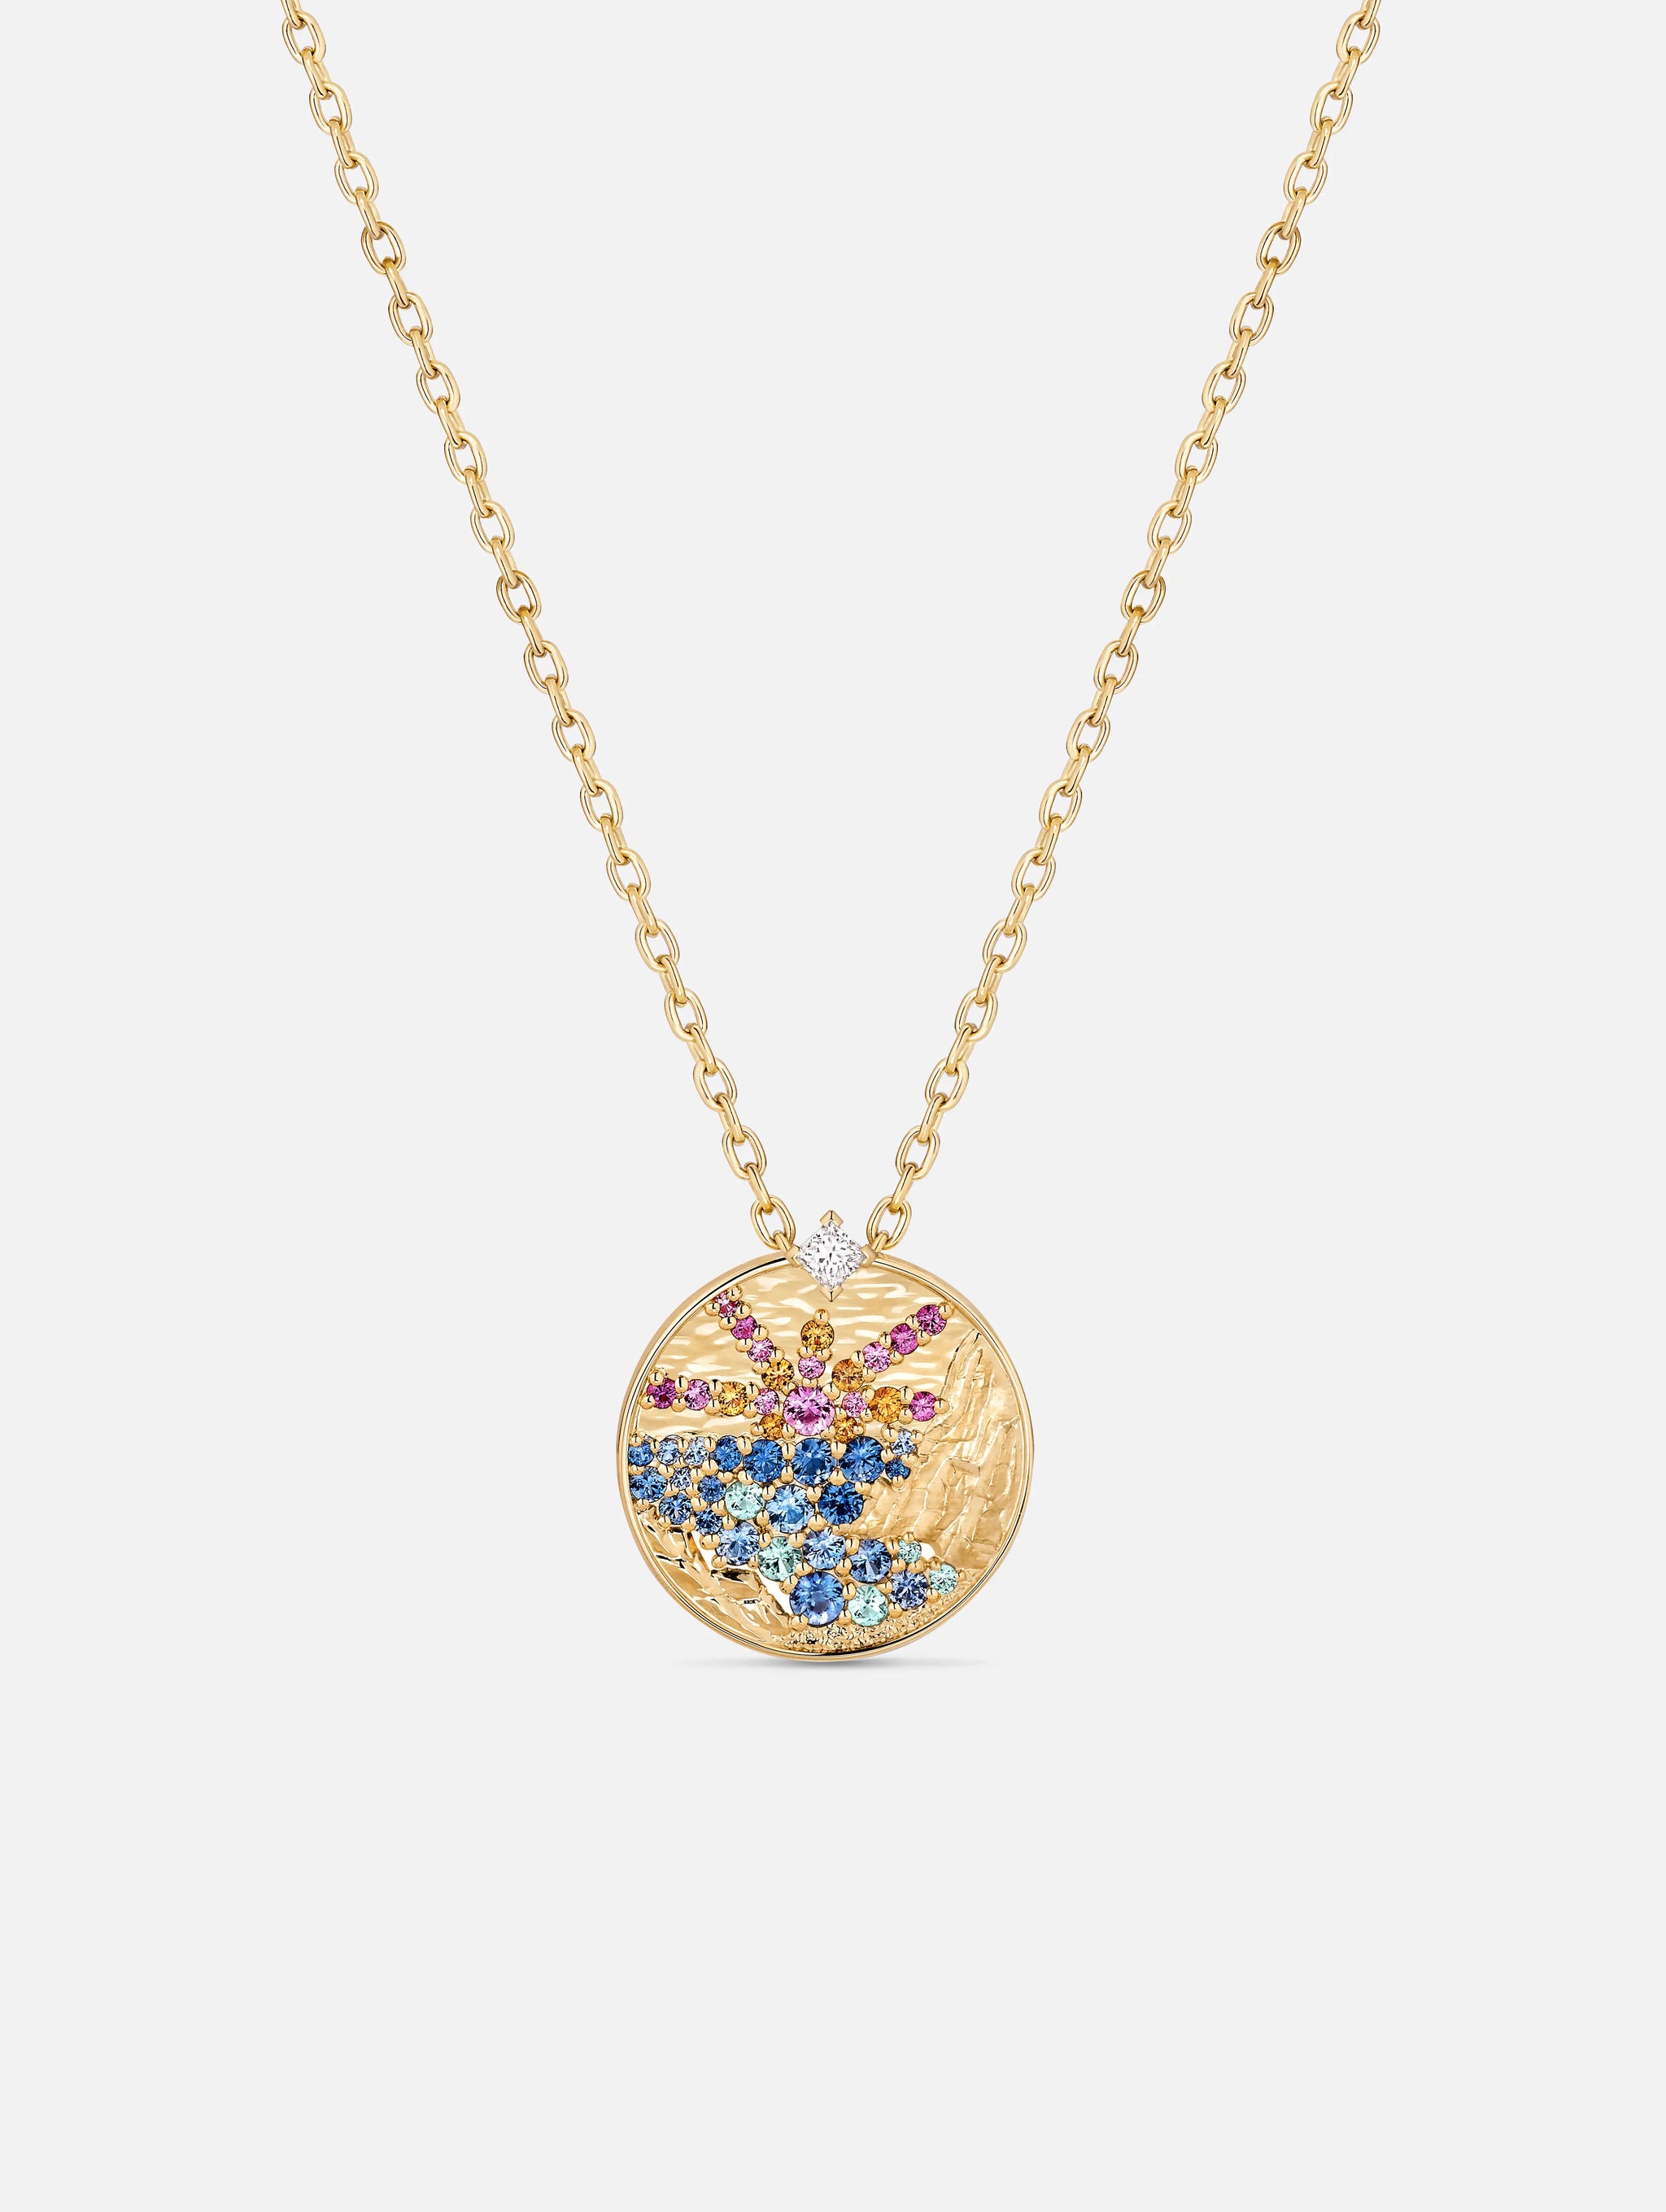 Sunset Medallion in Yellow Gold - 1 - Nouvel Heritage